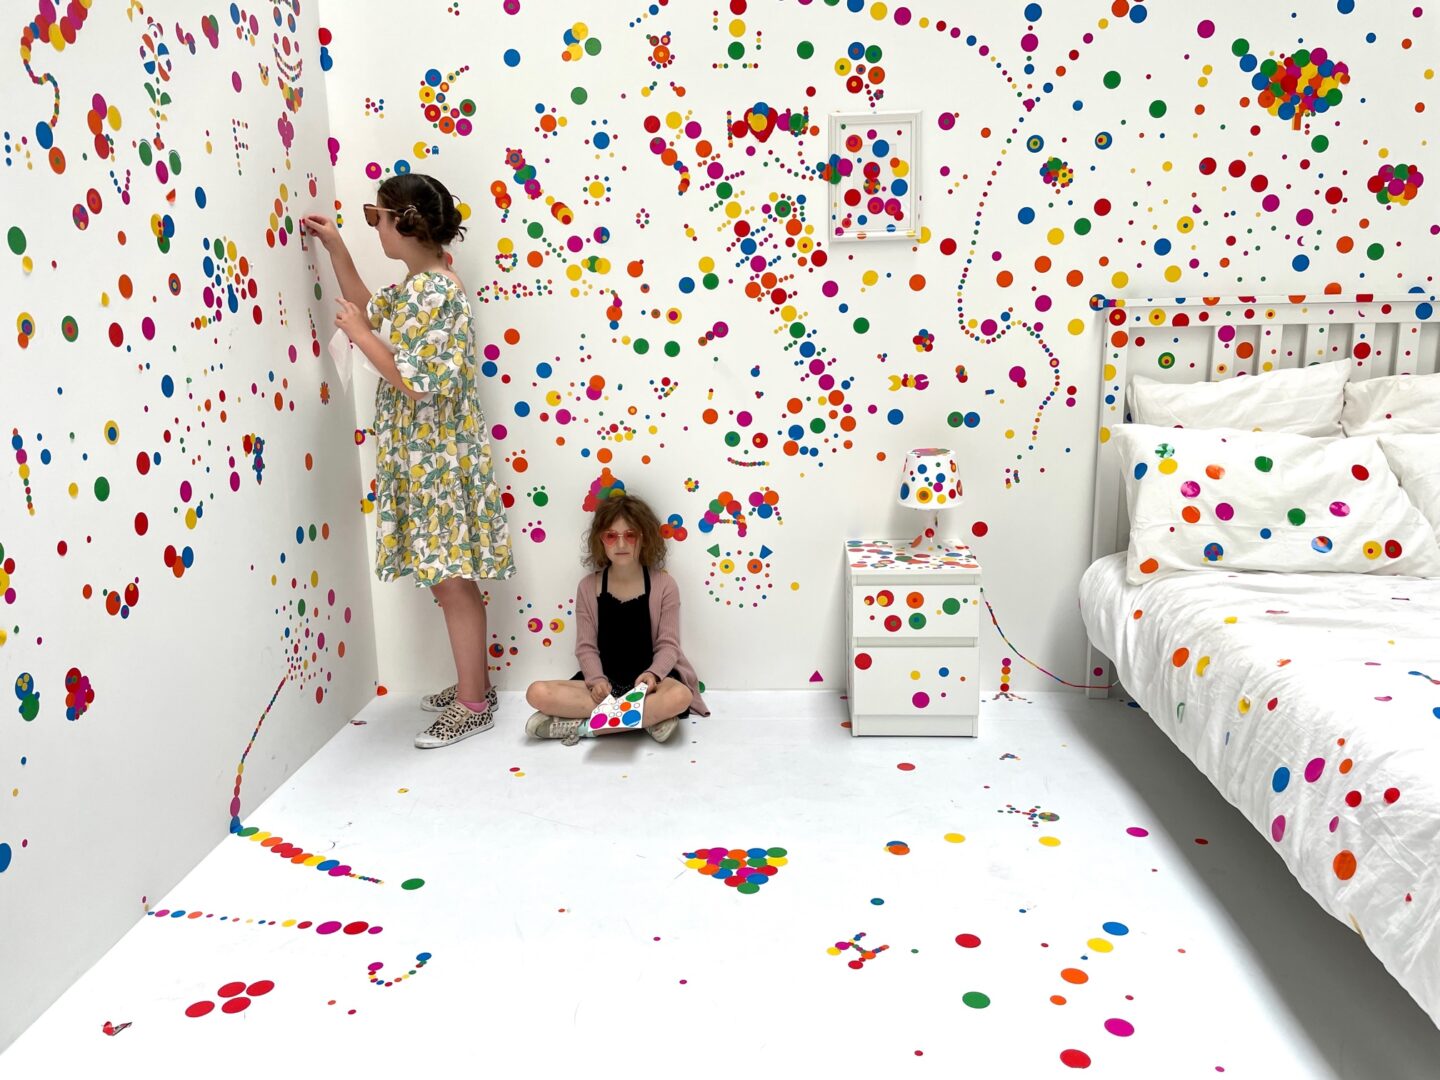 Obliteration Room stickers at Tate Modern London